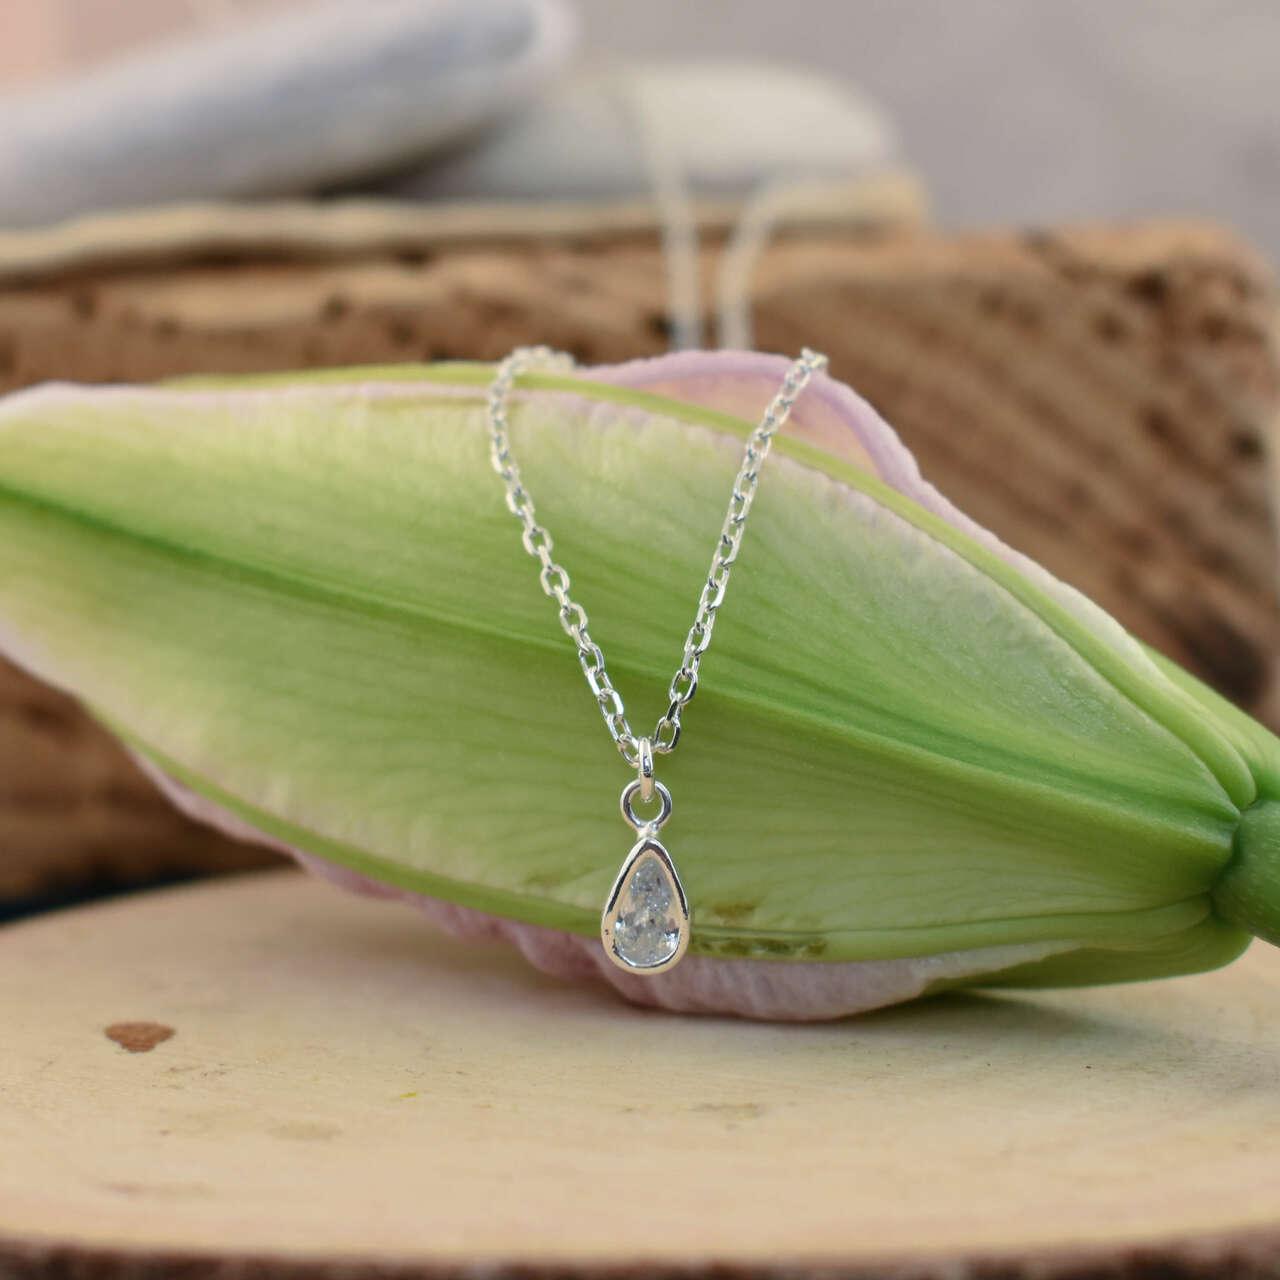 Teardrop cubic zirconia necklace with sterling silver chain